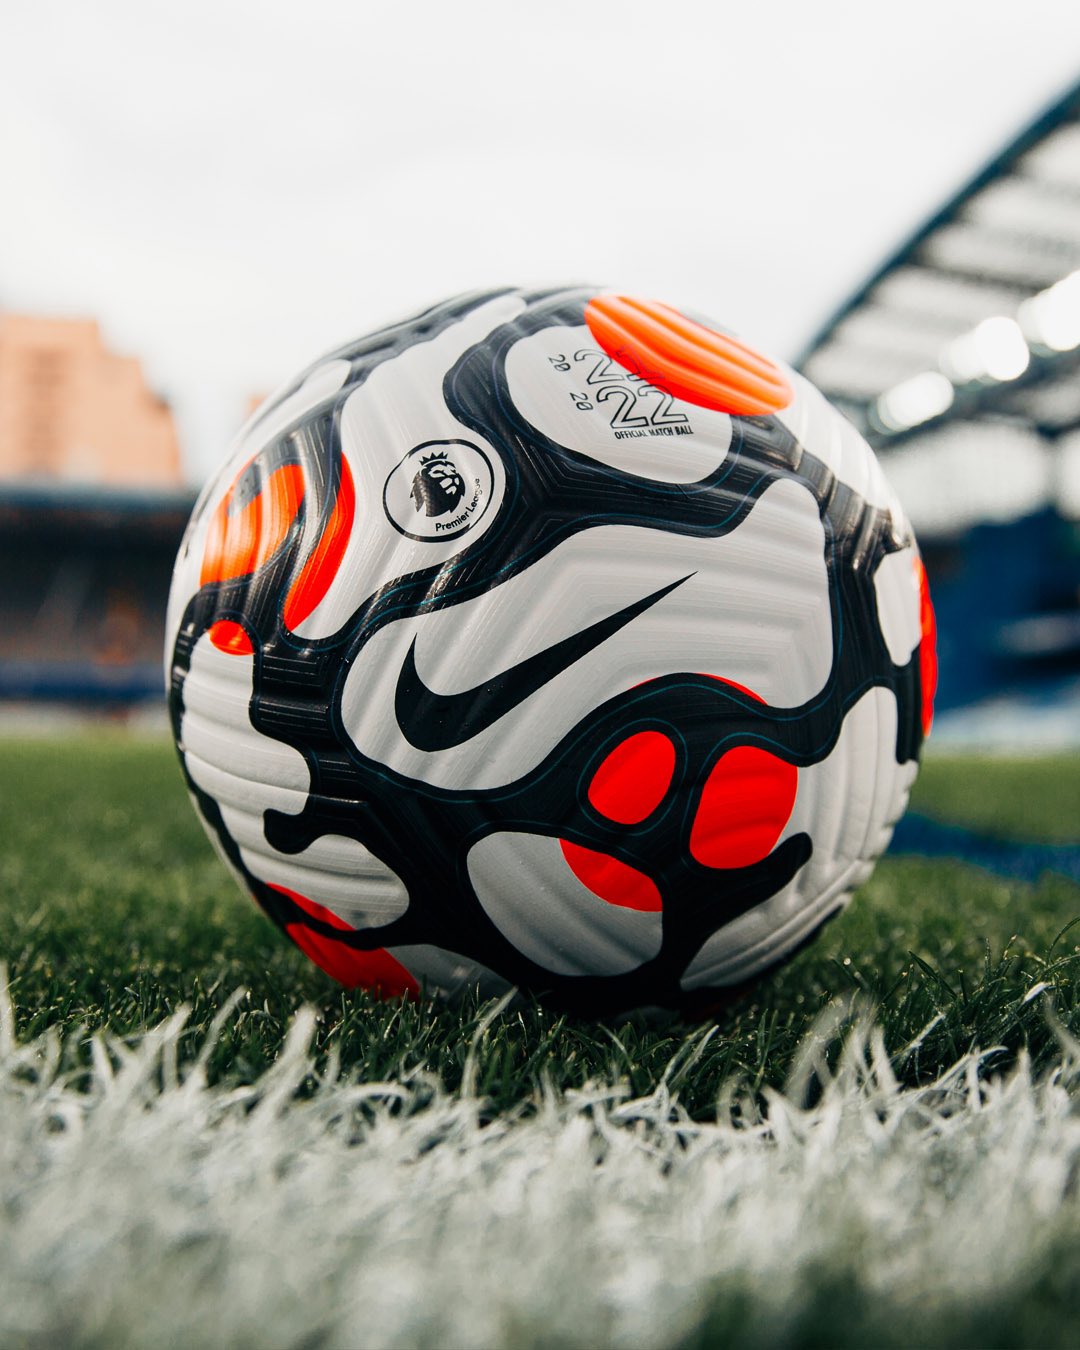 TCD New Premier League Ball For The 21 22 Season Has Been Revealed. Featuring A Wonderful Design And Nike's Aerowsculpt Tech, This One Could Be An Iconic Ball. Who